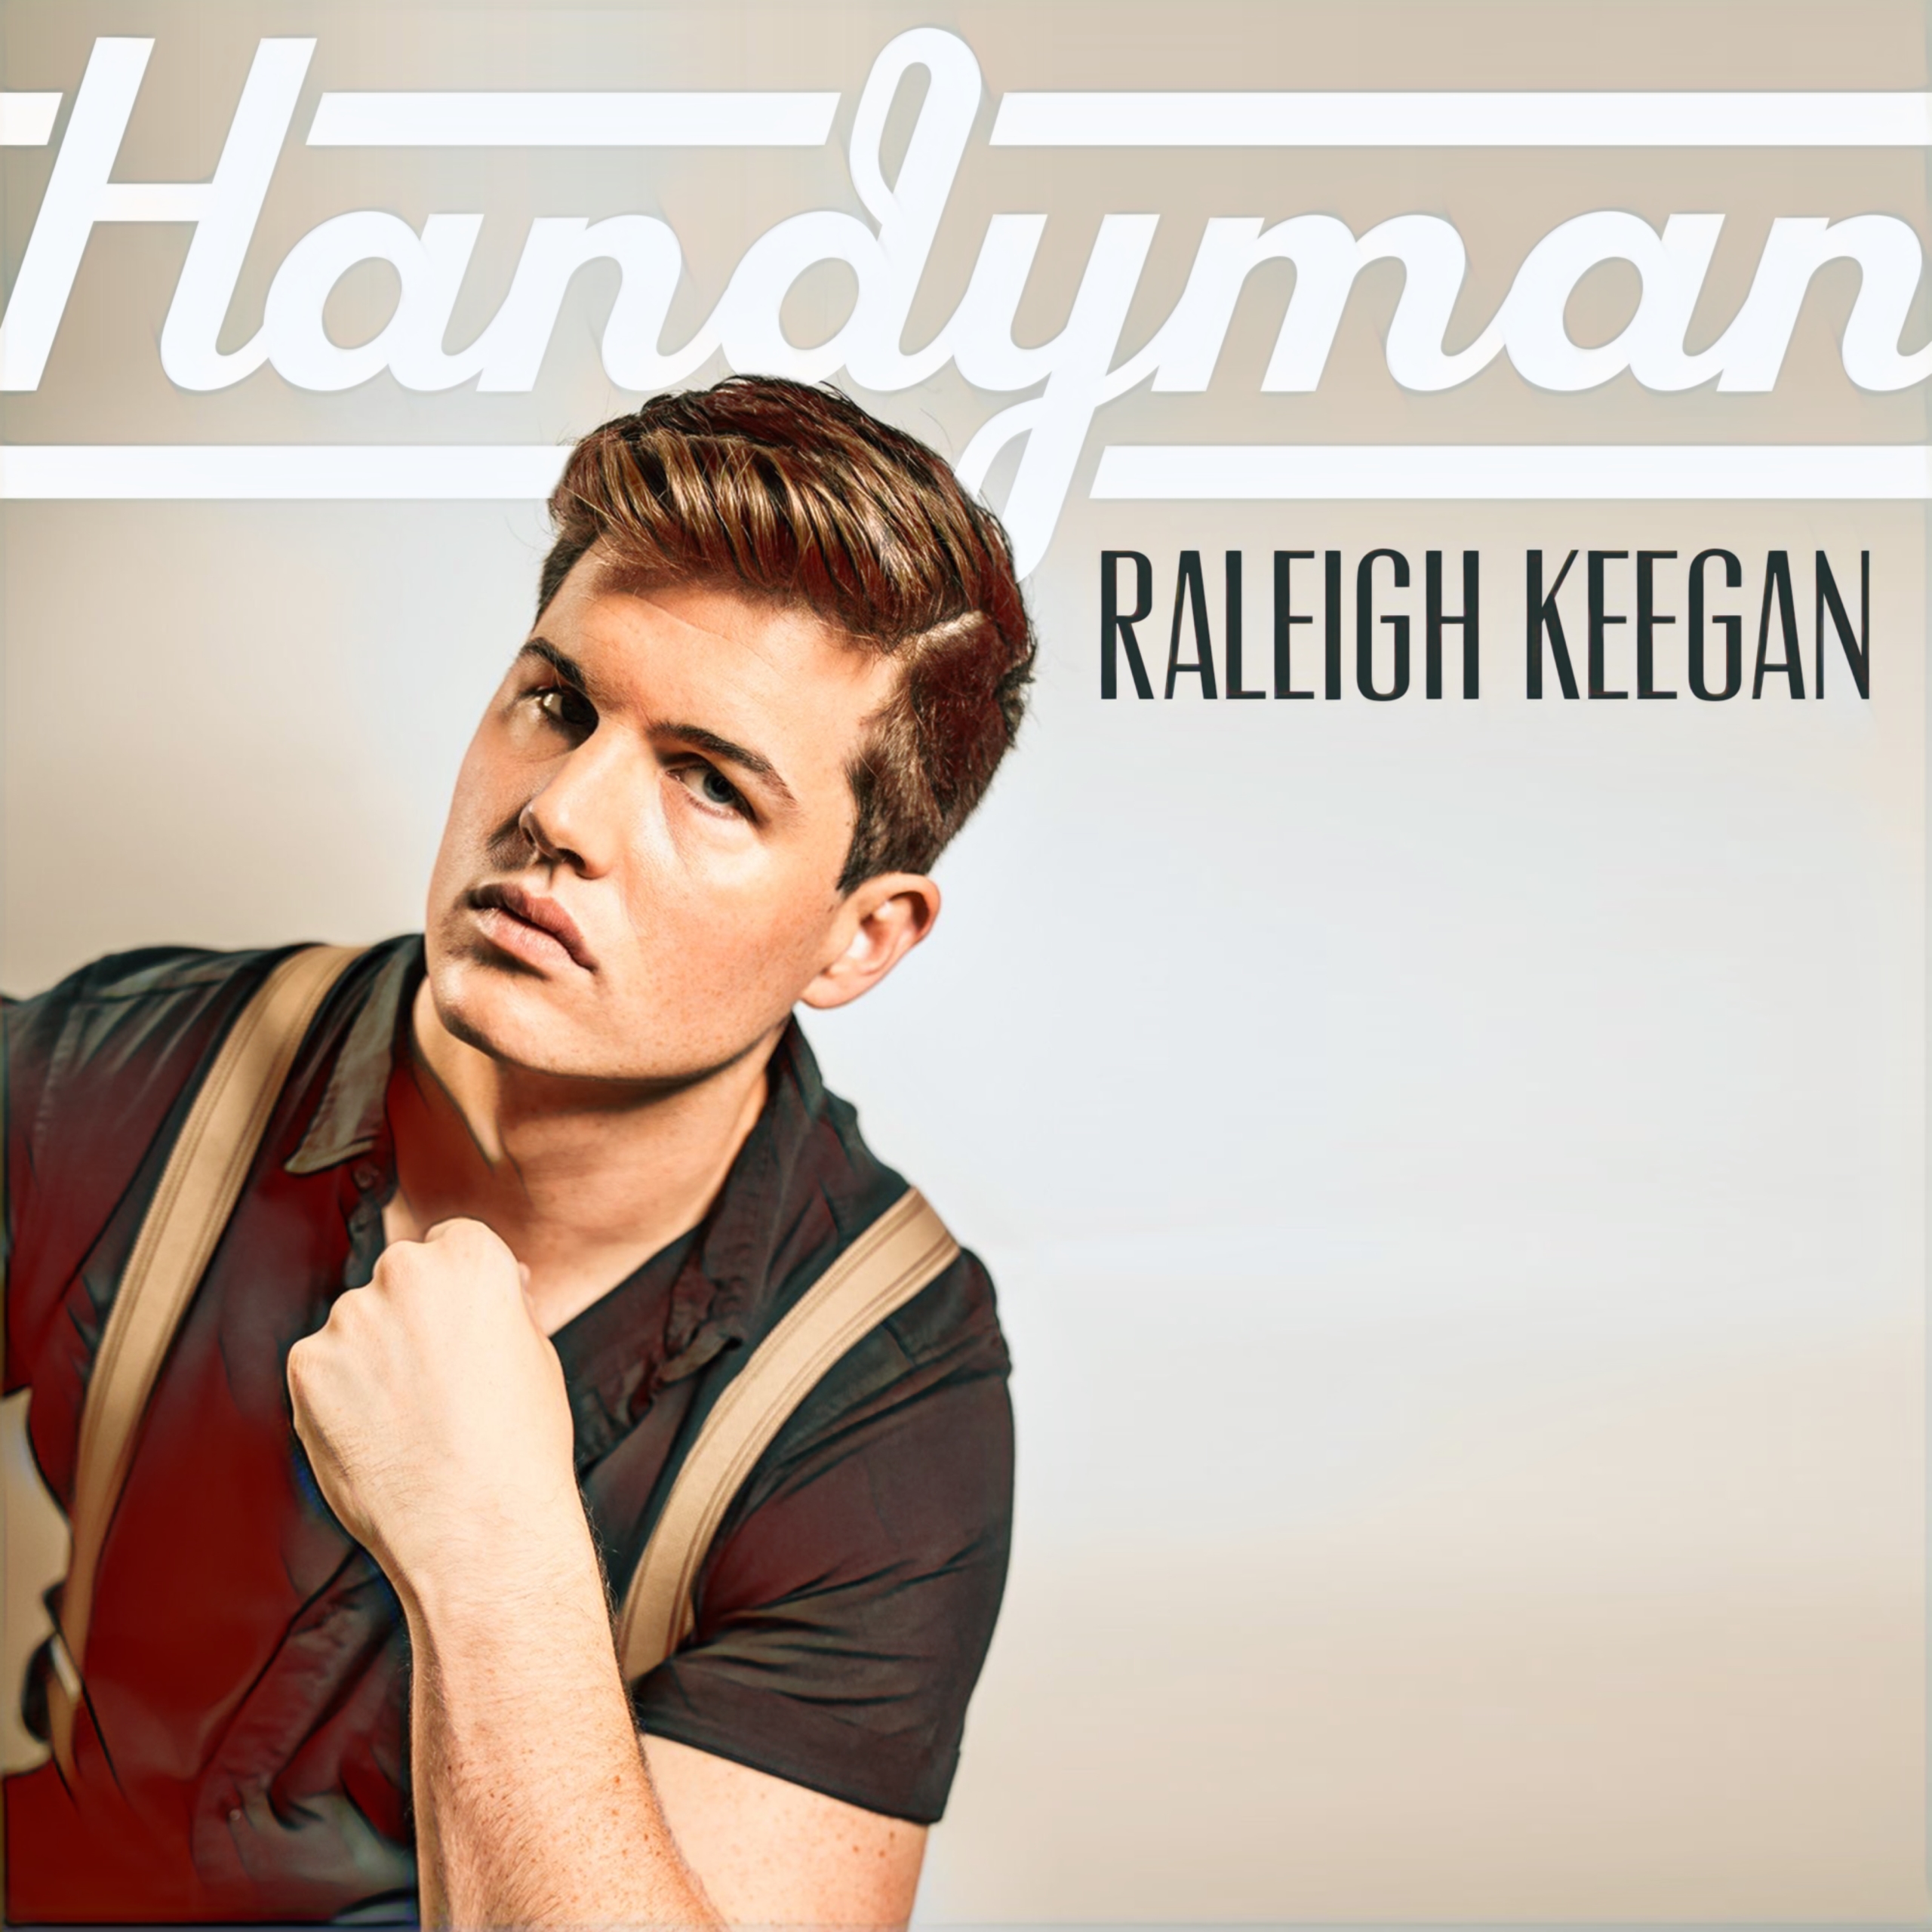 Raleigh Keegan’s new song “Handyman” is available everywhere now, March 5th